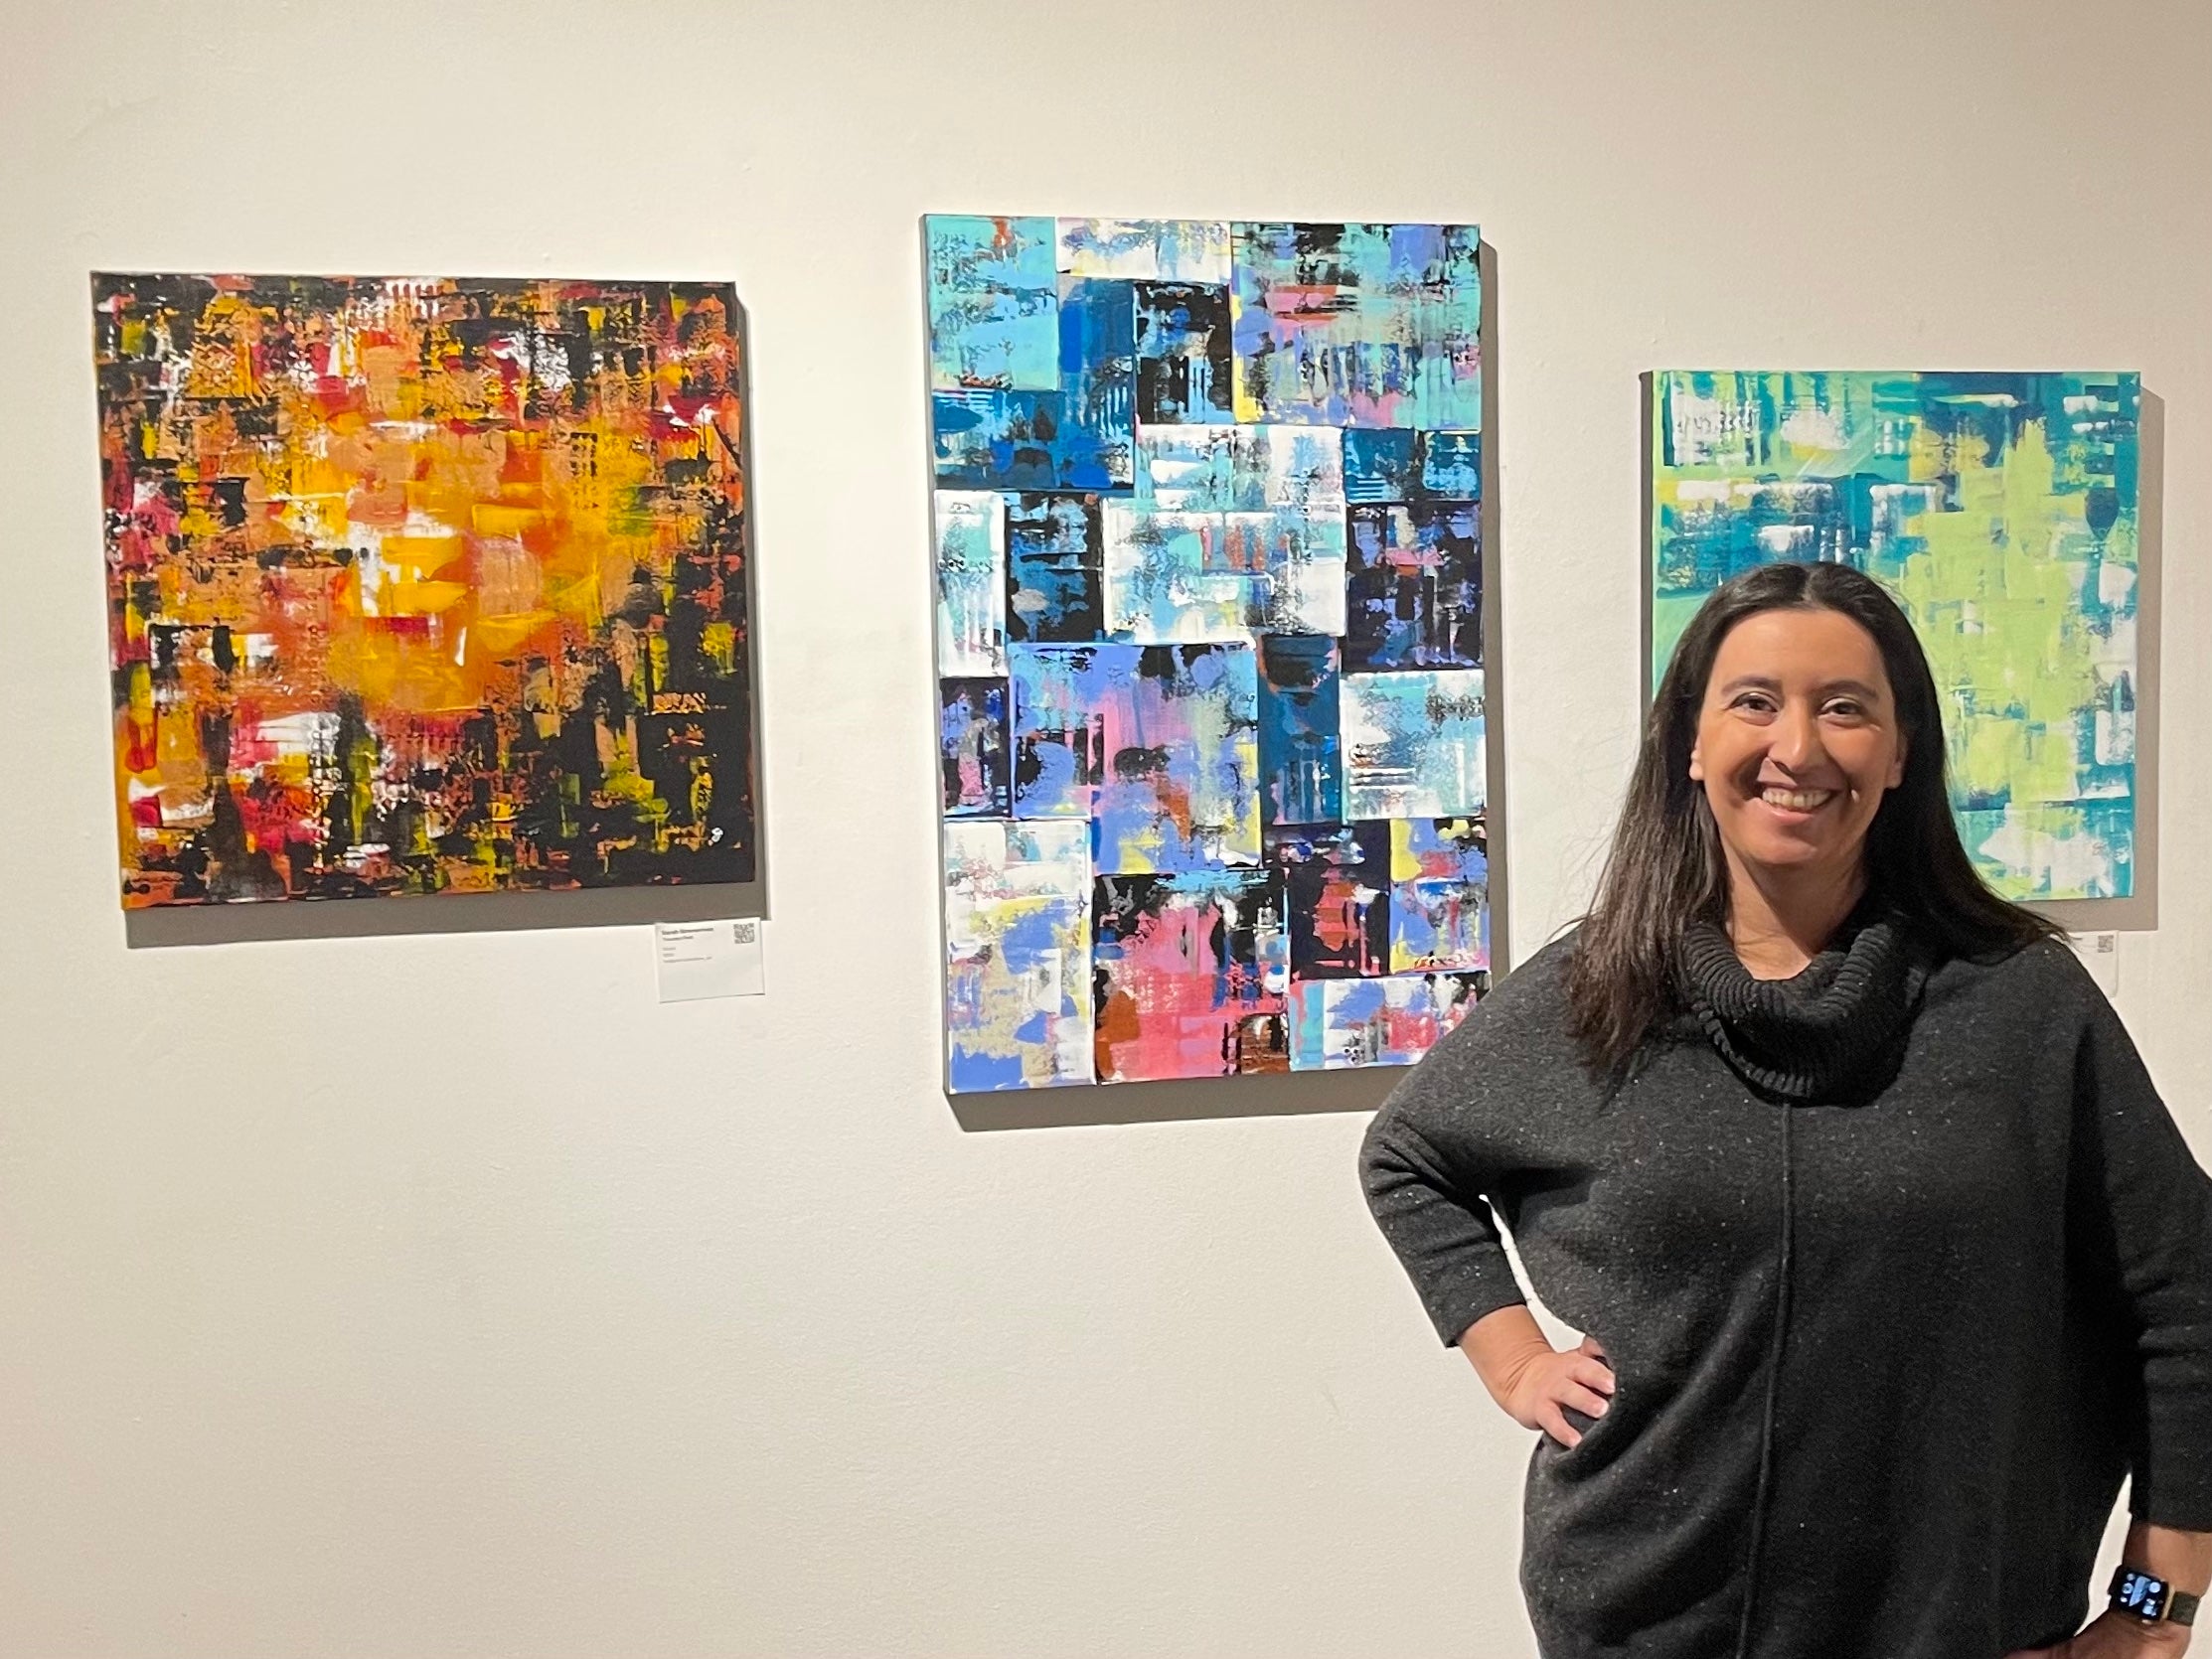 Sarah Simmerman with her work at the Becoming Exhibit at New City Studio in Phoenix AZ